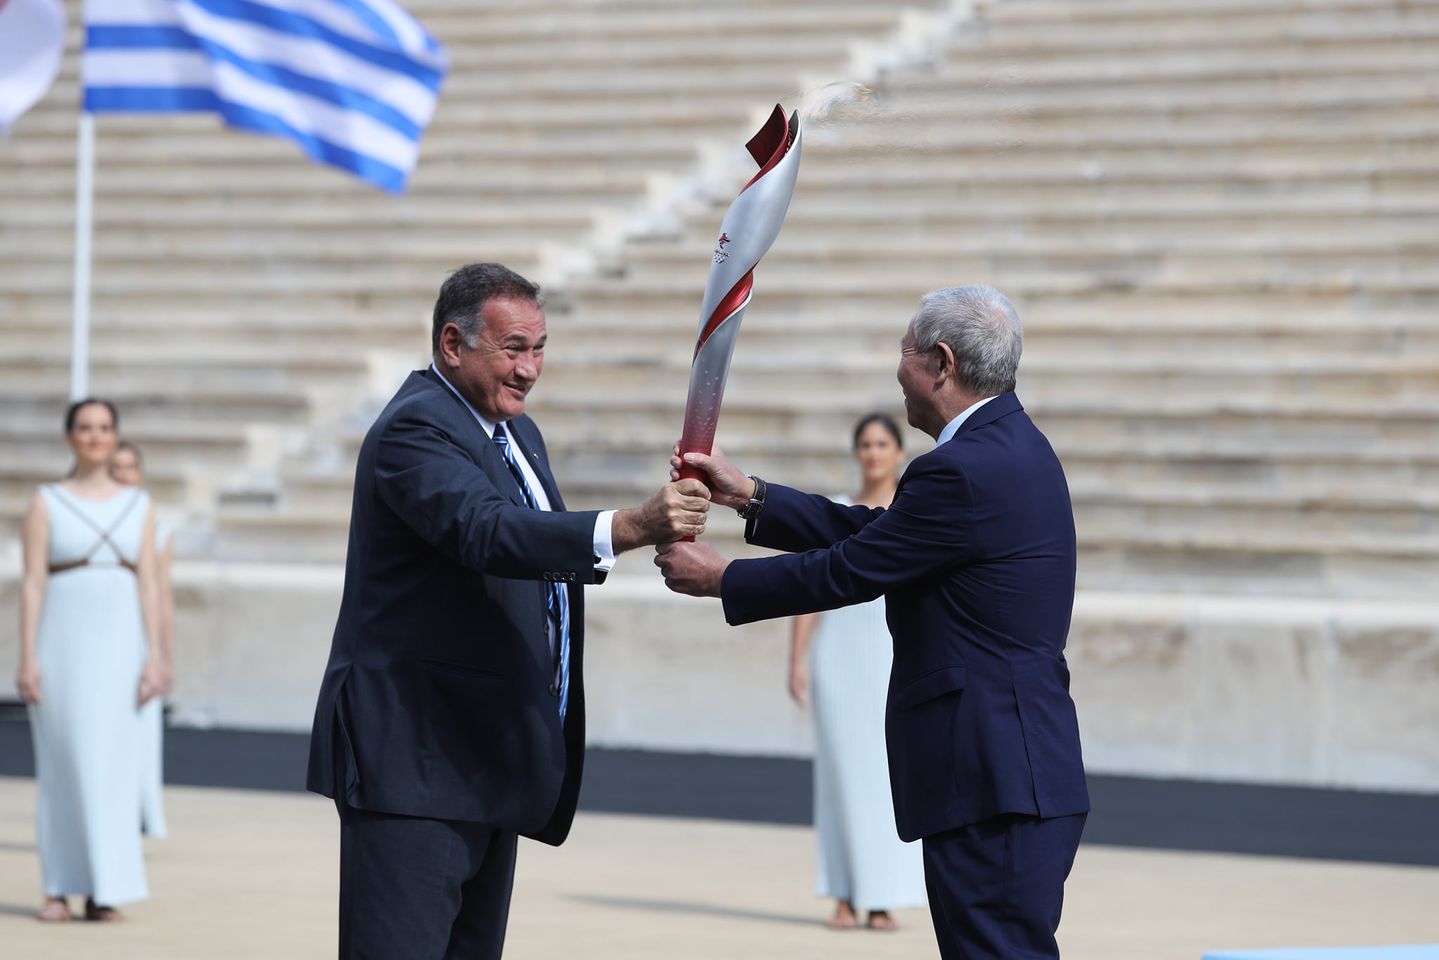 Olympic flame Beijing 2022